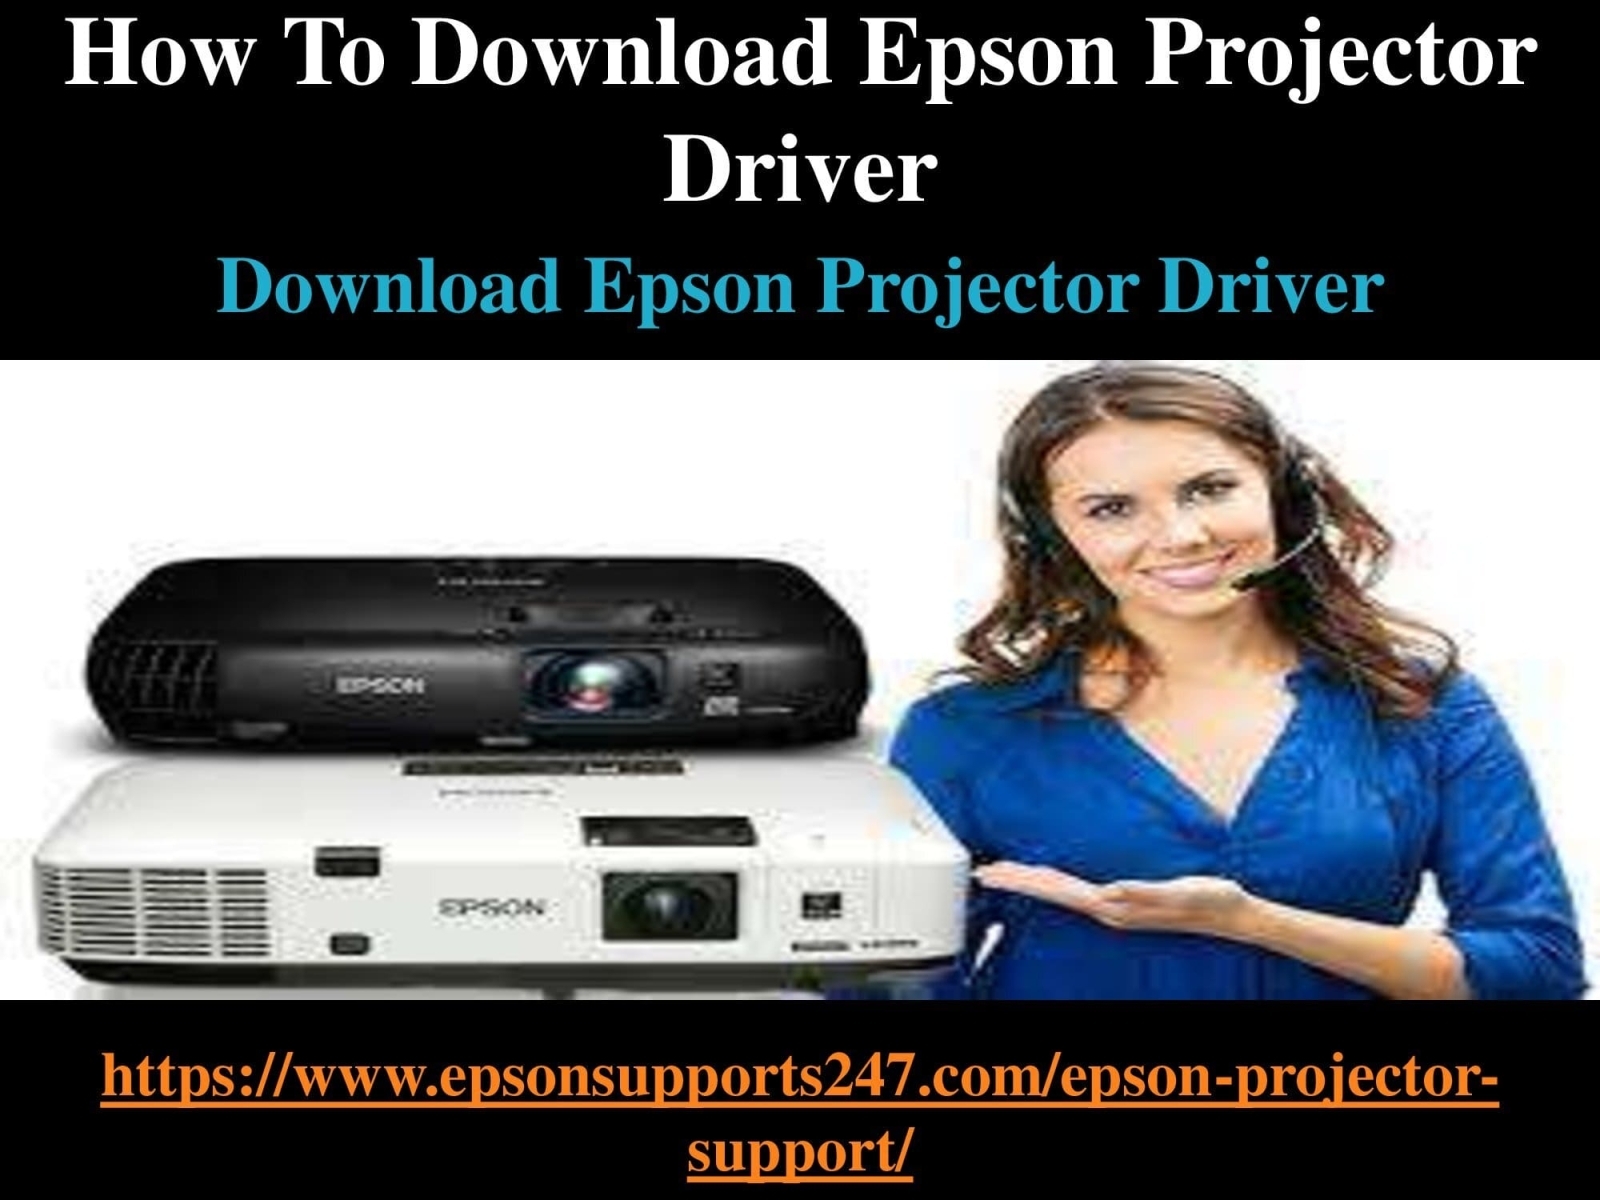 epson projector driver download for windows 10